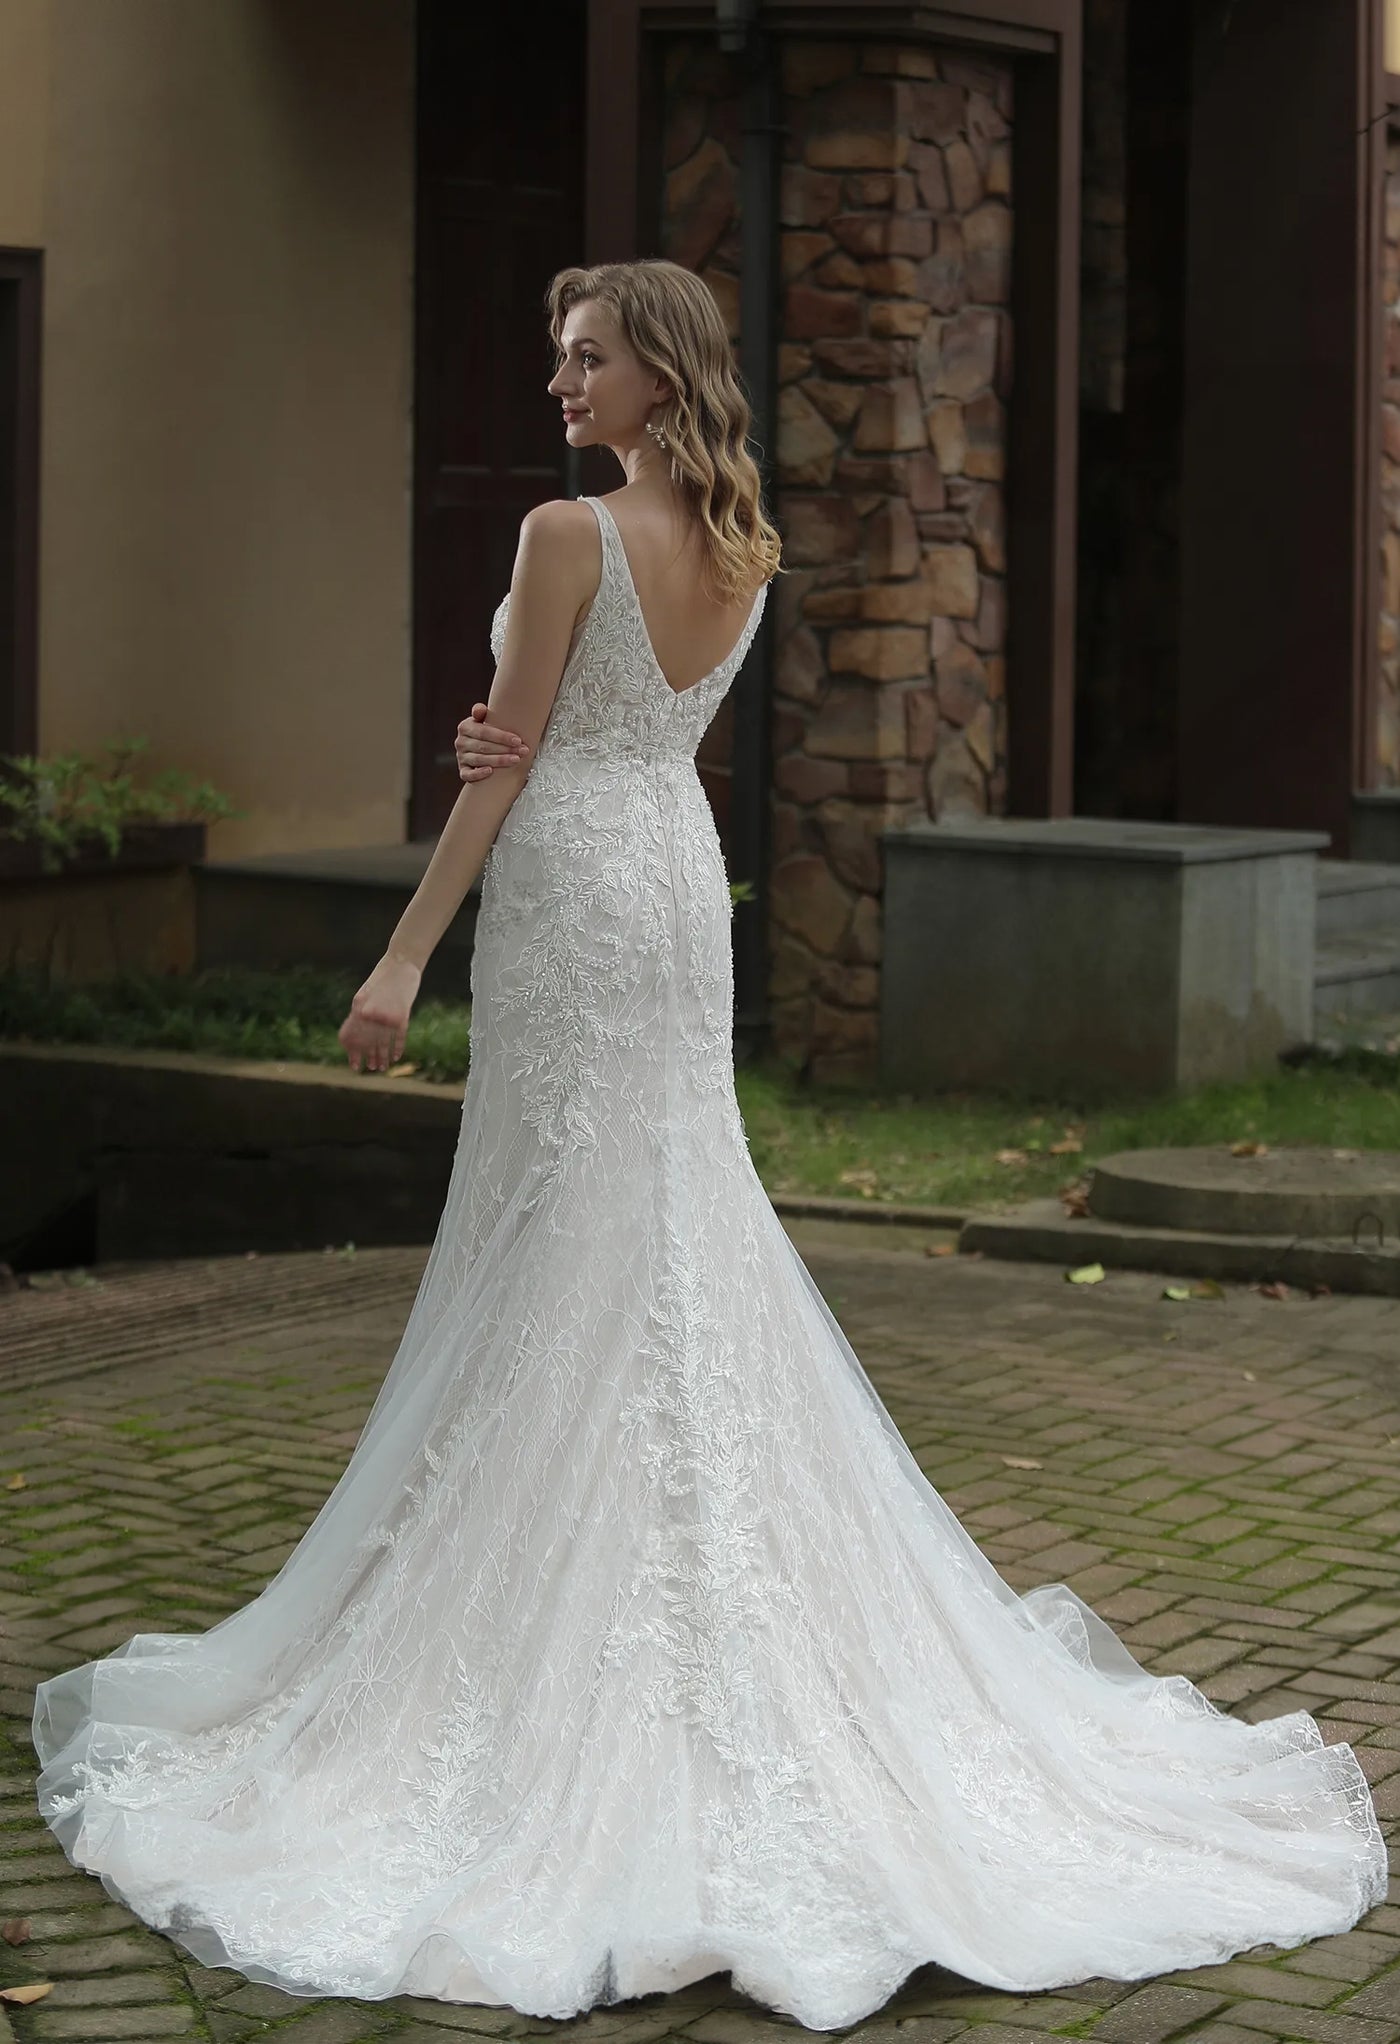 A bride in an elegant Bergamot Bridal Classic V-Neck Allover Lace Fit And Flare Wedding Dress with a train, posing outdoors.